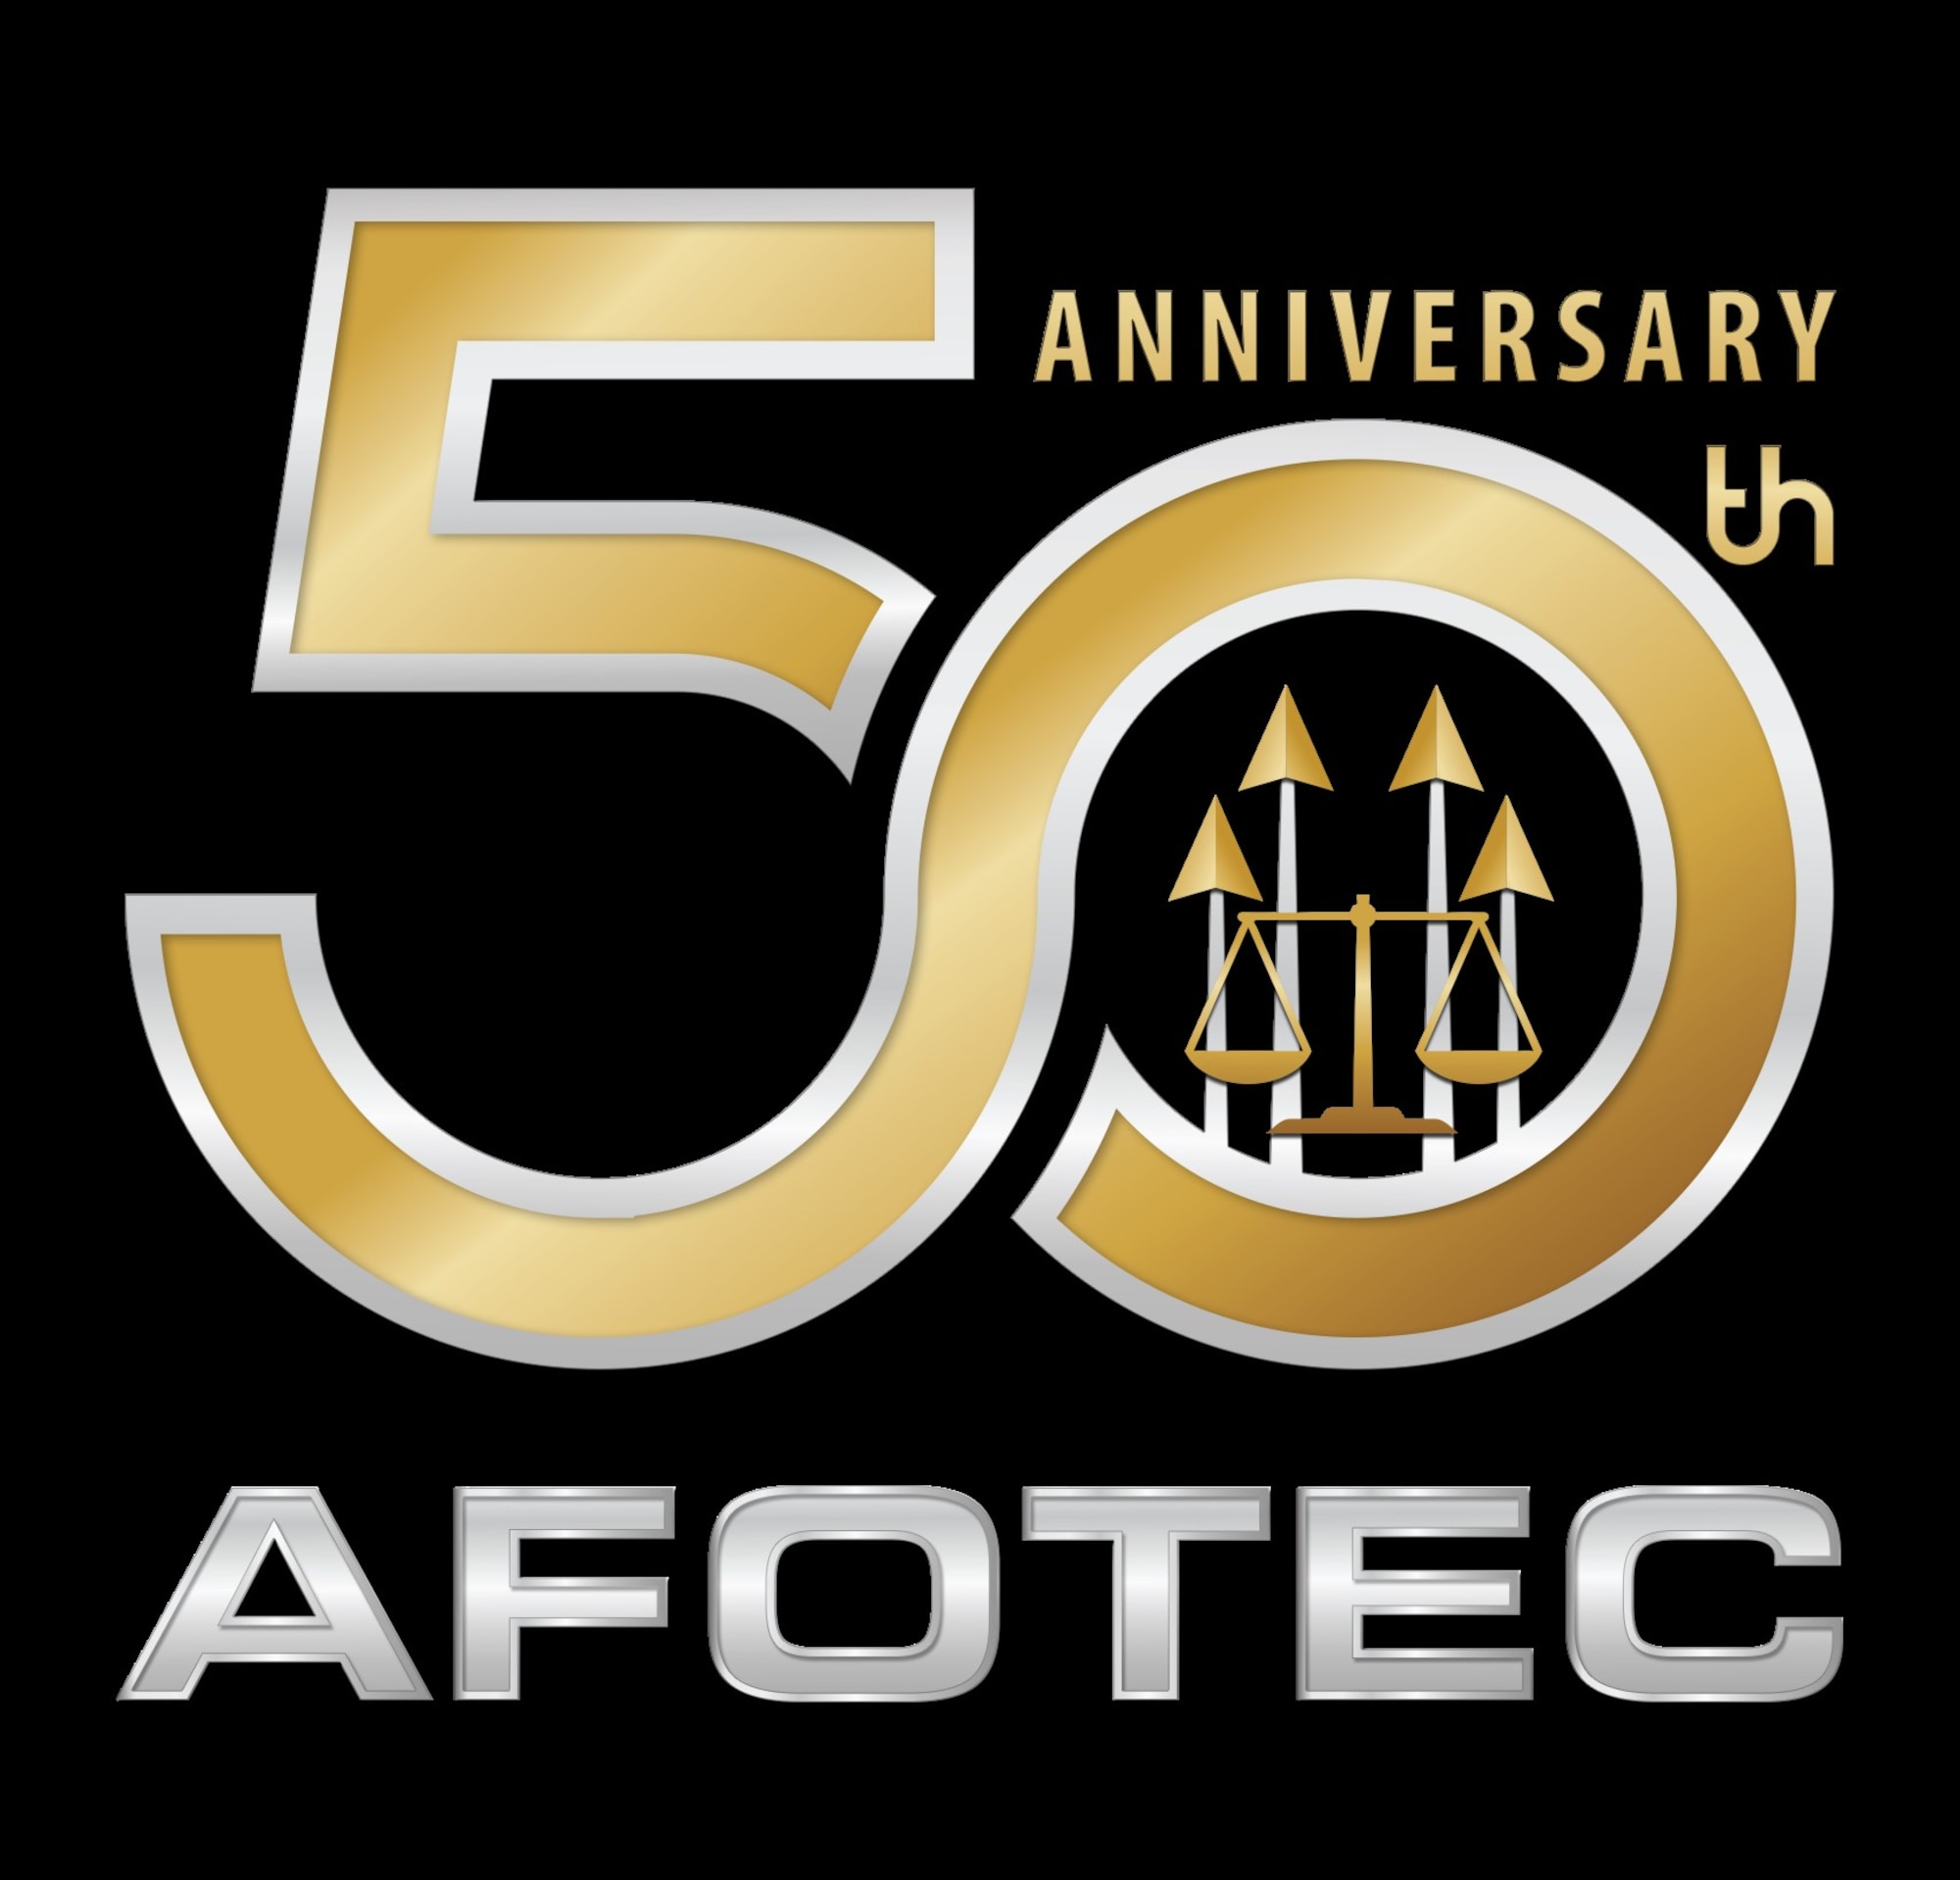 Air Force Operational Test and Evaluation Center 50th Anniversary logo.